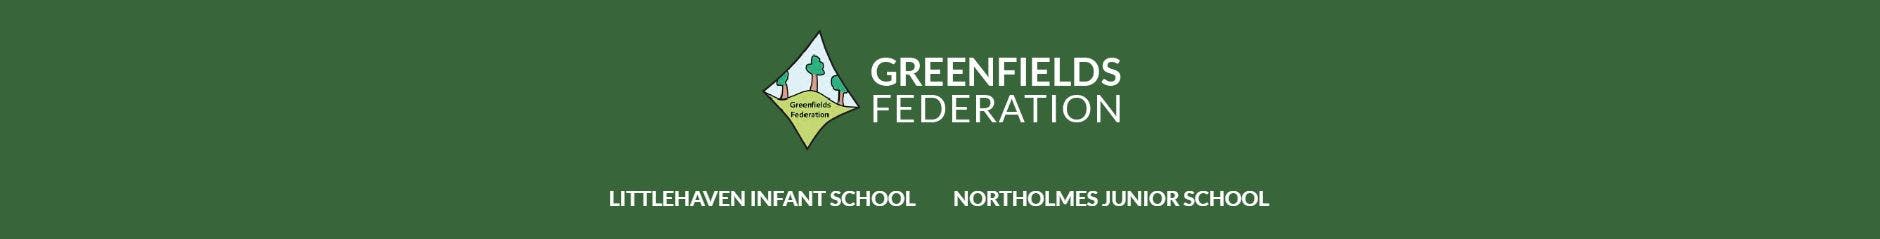 Greenfields Federation, Littlehaven Infant School and Northolmes Junior School